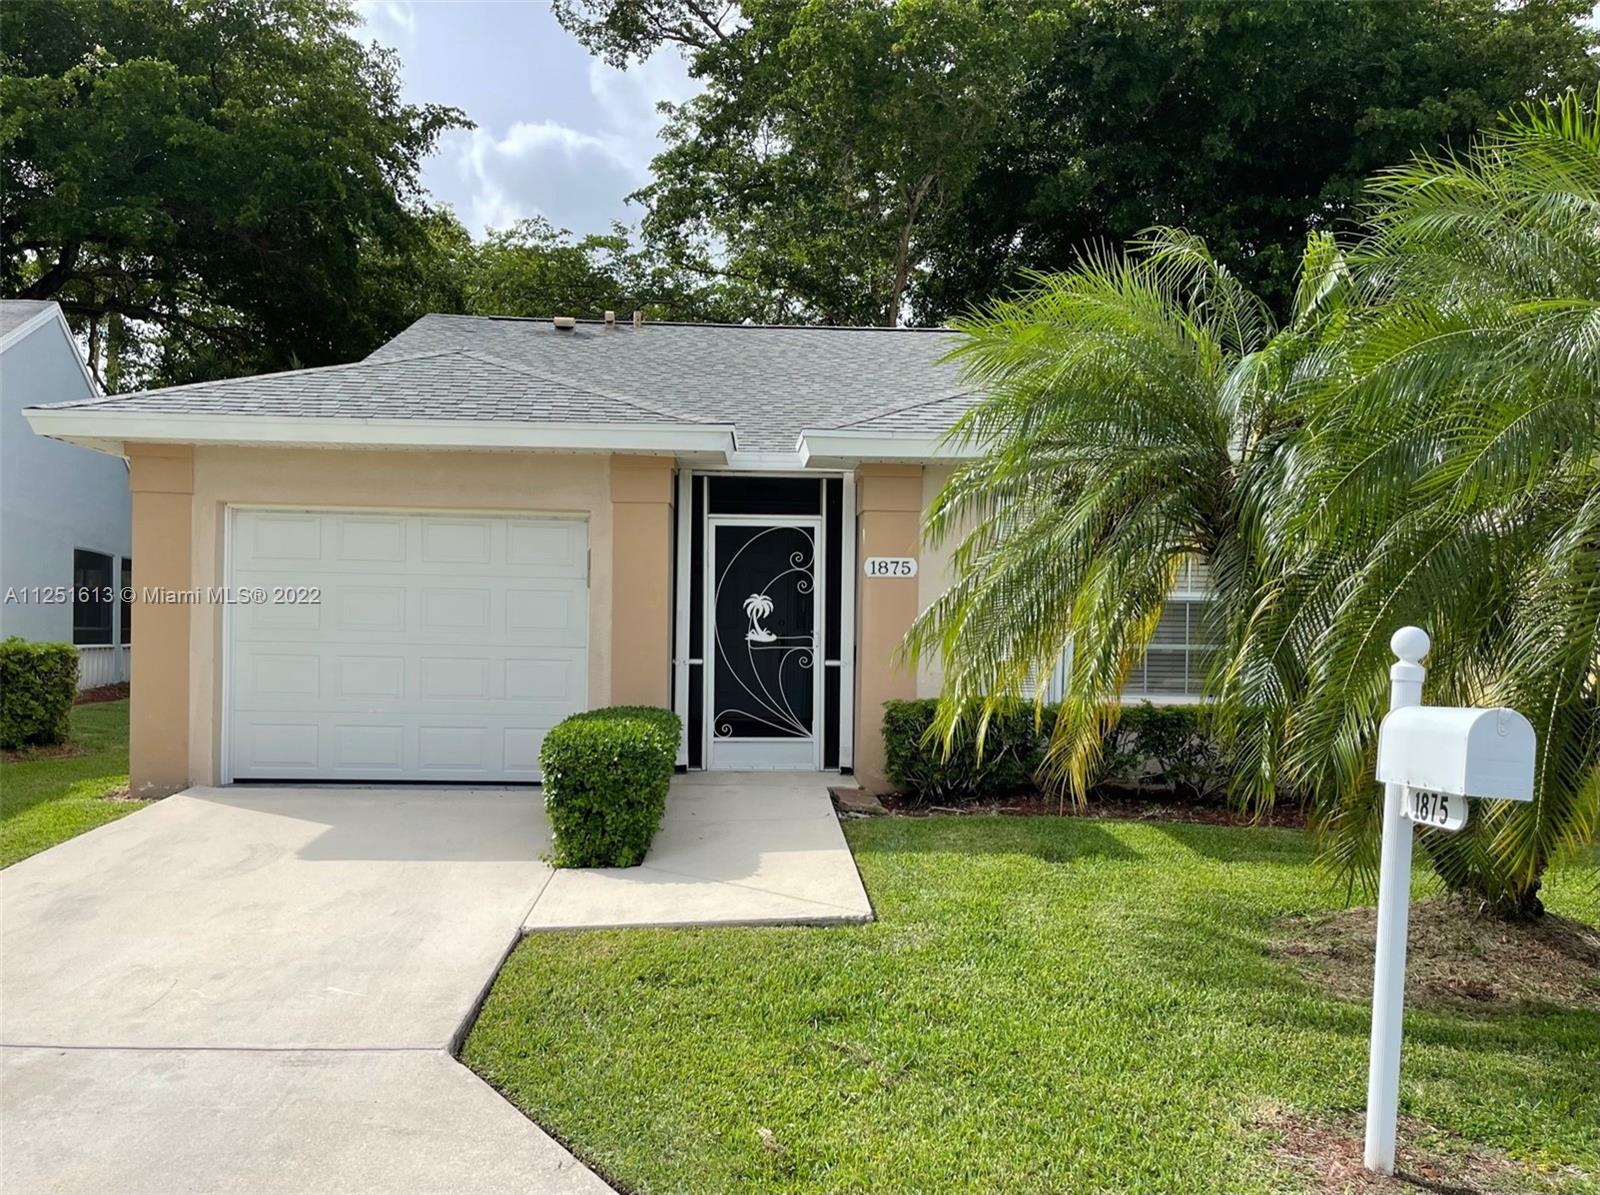 LOVELY UPDATED 2 BR/2 BA HOME W/ GARAGE. OPEN SPLIT FLOOR PLAN WITH TILE FLOORS THROUGHOUT, CORIAN COUNTERTOPS IN KITCHEN, UPDATED BATHROOMS, EXTRA LIVING SPACE AND LARGE SCREENED TERRACE. RENT INCLUDES ATT UVERSE CABLE & UNTERNET, ALARM, SECURITY, LAWN MAINT AND CLUBHOUSE ACCESS. READY TO MOVE IN SEPT 15.